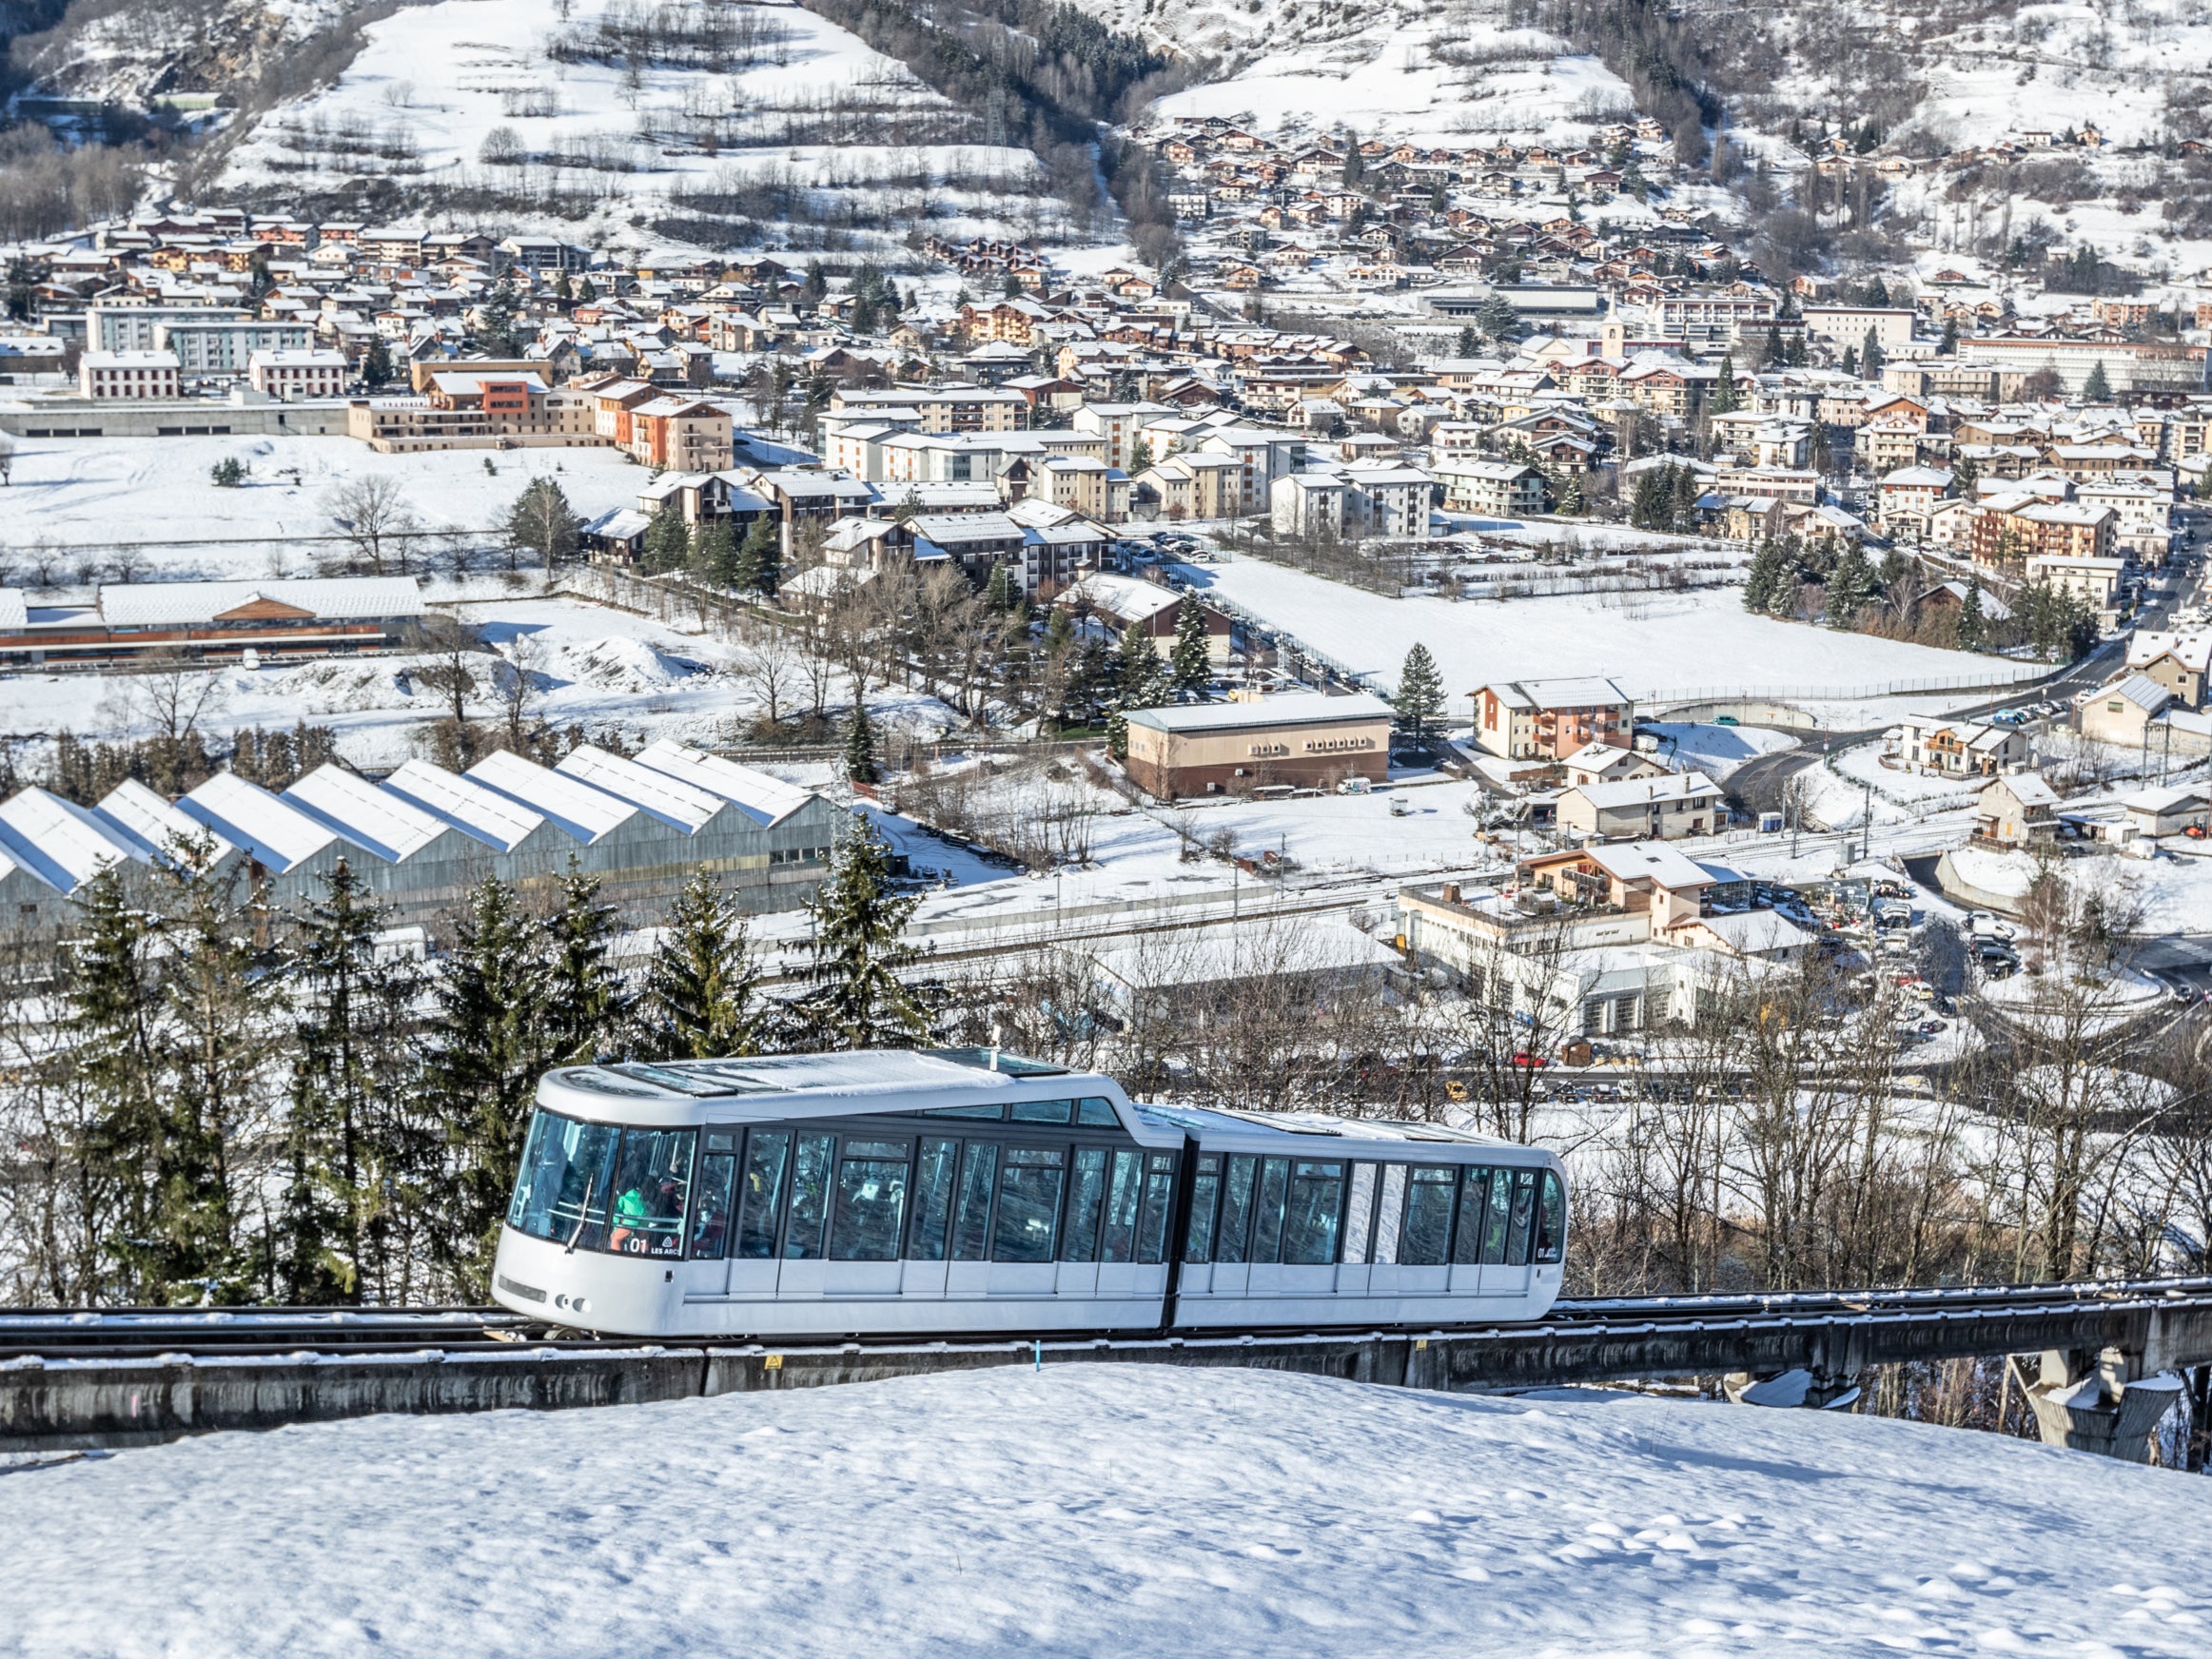 Les Arcs is accessible, car-free, via the funiculaire from Bourg